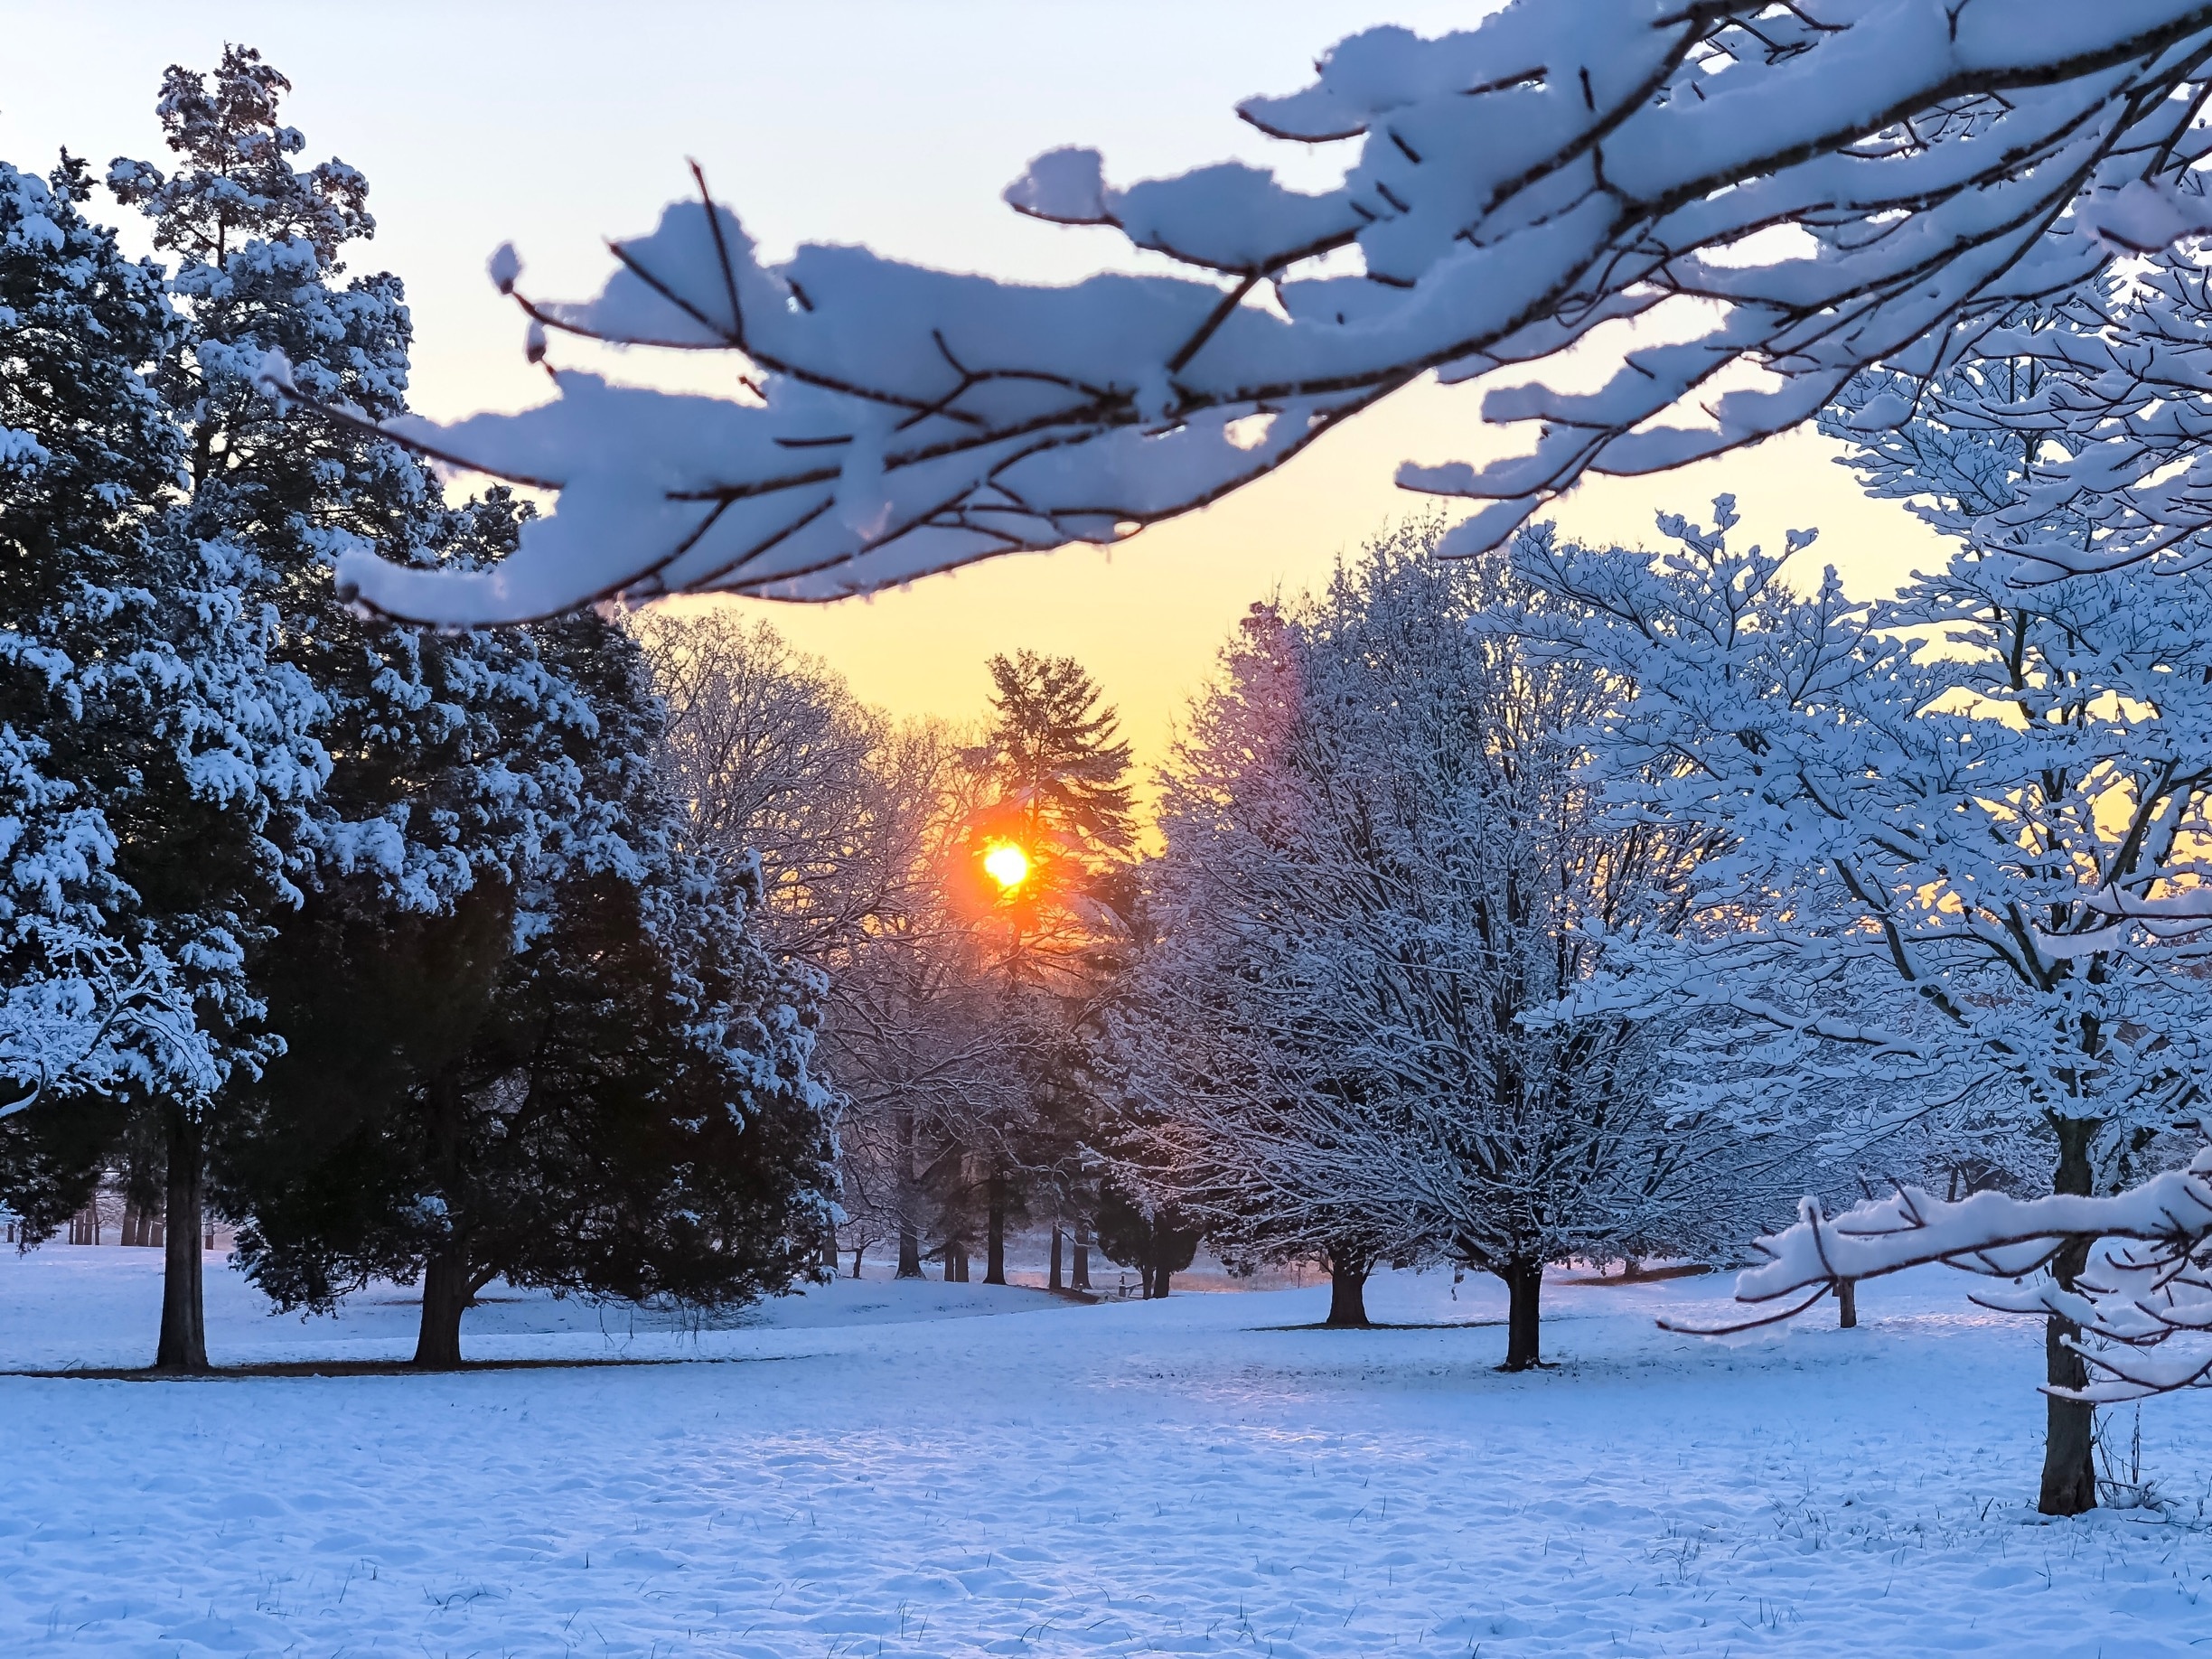 Sunrise and snow go beautifully together in this shot from Valley Forge National Park #Parks